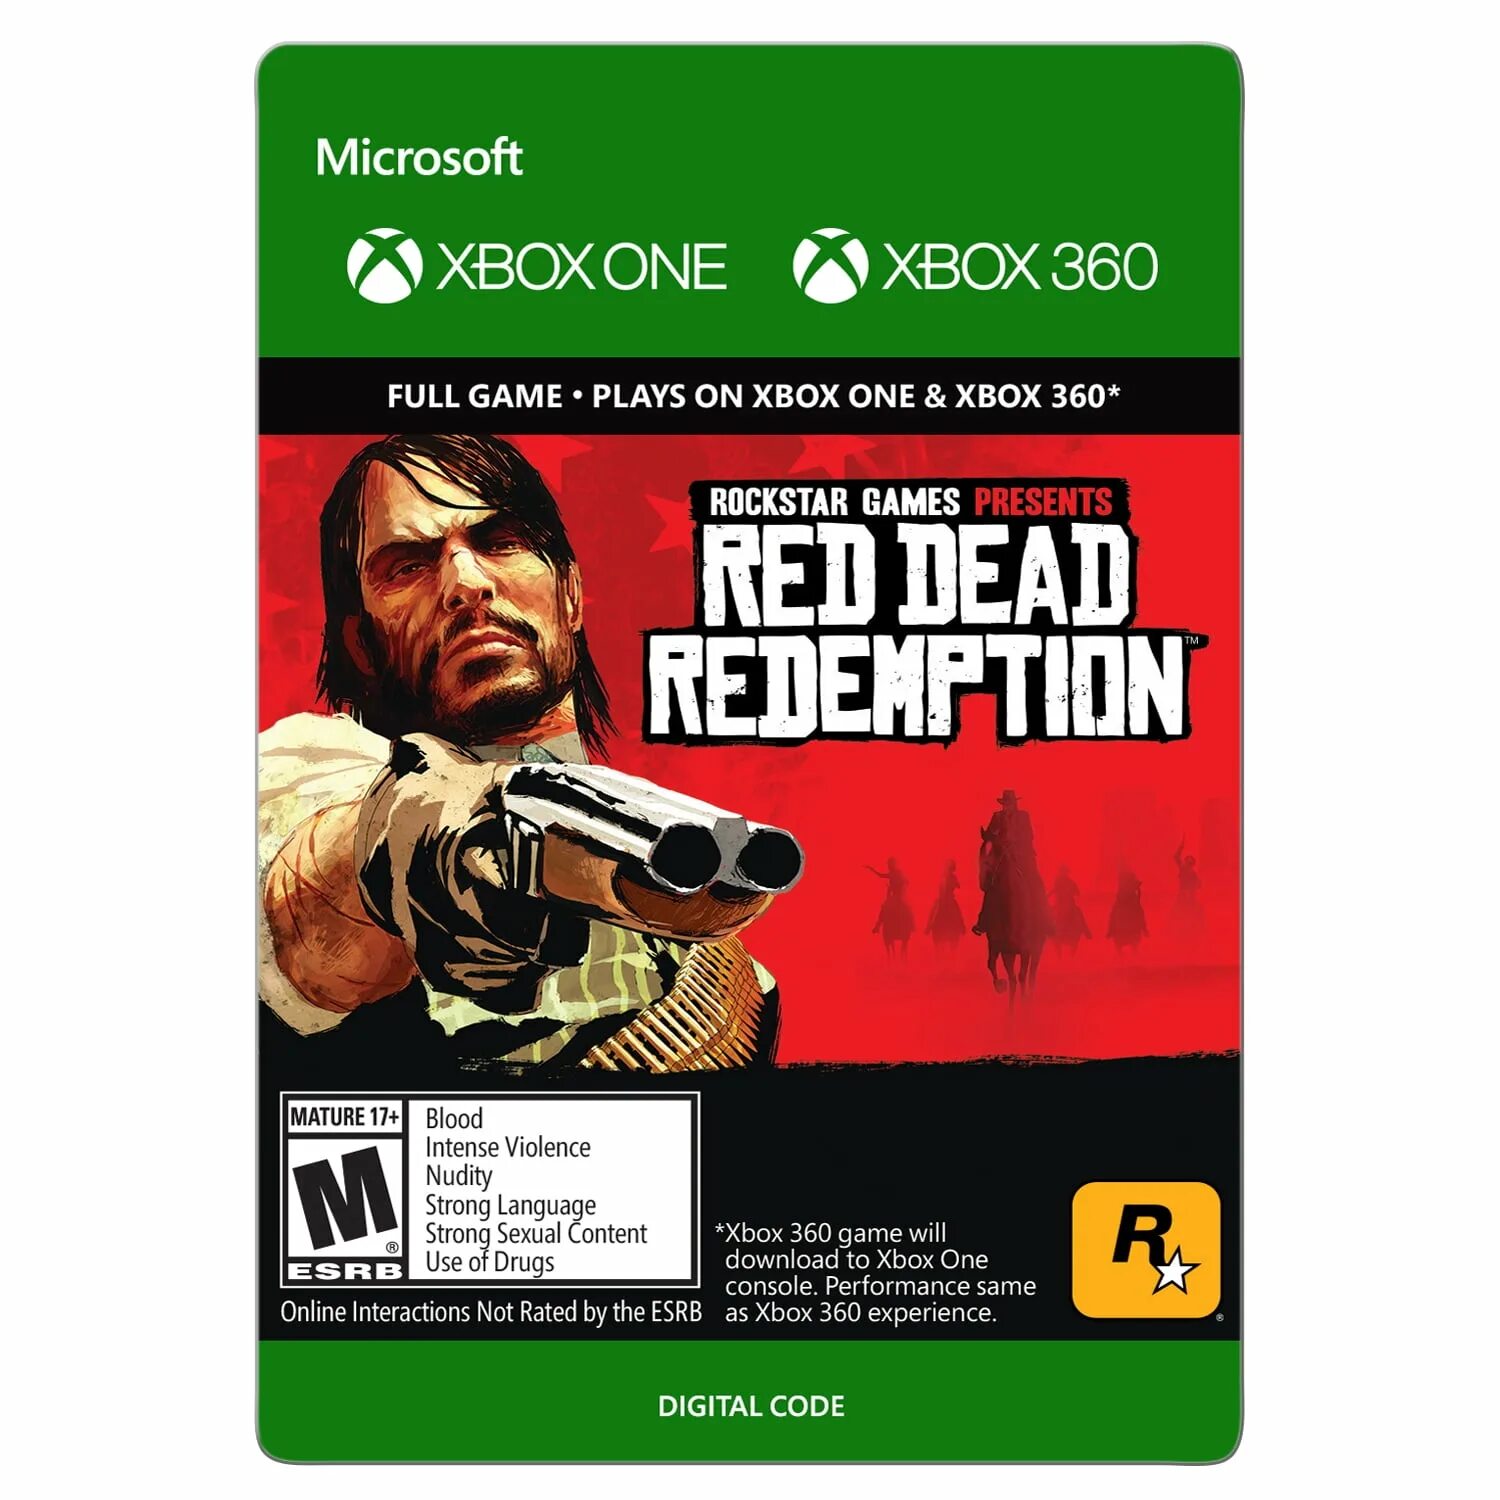 Red dead redemption xbox купить. Red Dead Redemption 1 Xbox 360. Rdr 2 Xbox 360. Ред деад редемптион хбокс 360. Rdr2 Xbox one диск.